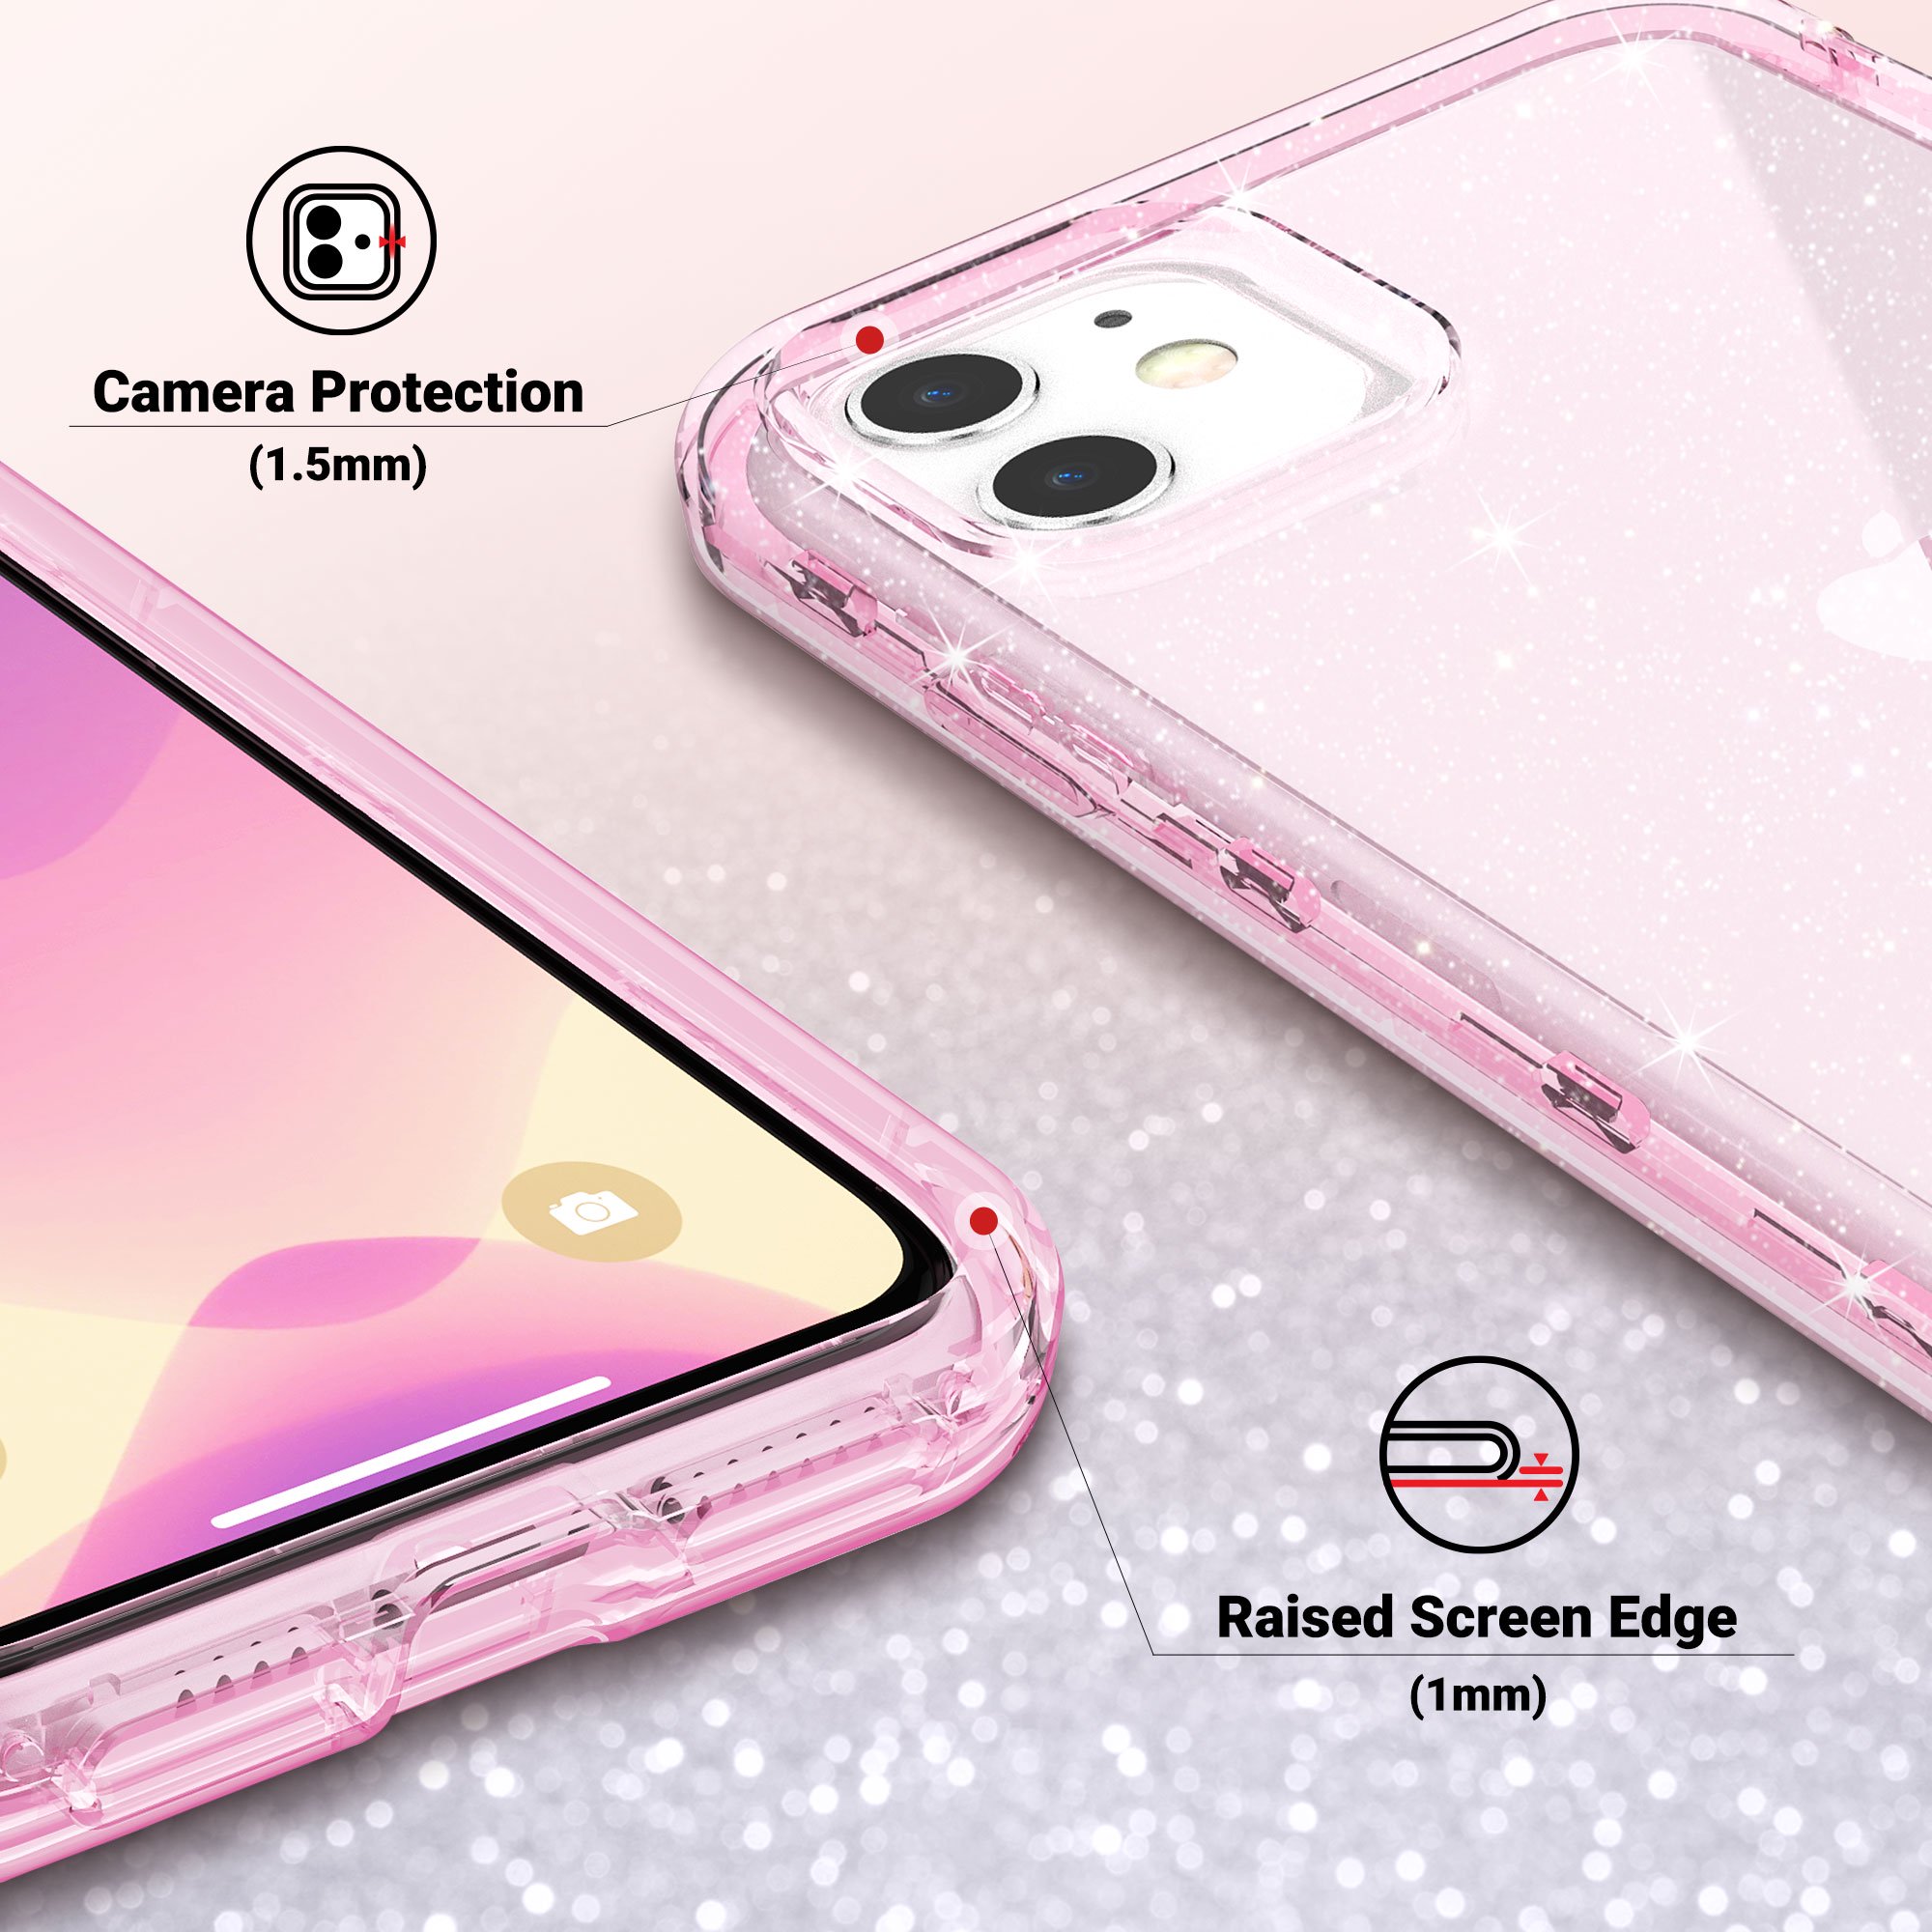 iPhone 11 Case, Heavy Duty Shockproof Rugged Protection TPU Bumper Phone Case for Apple iPhone 11 6.1 inch, Pink Clear Glitter